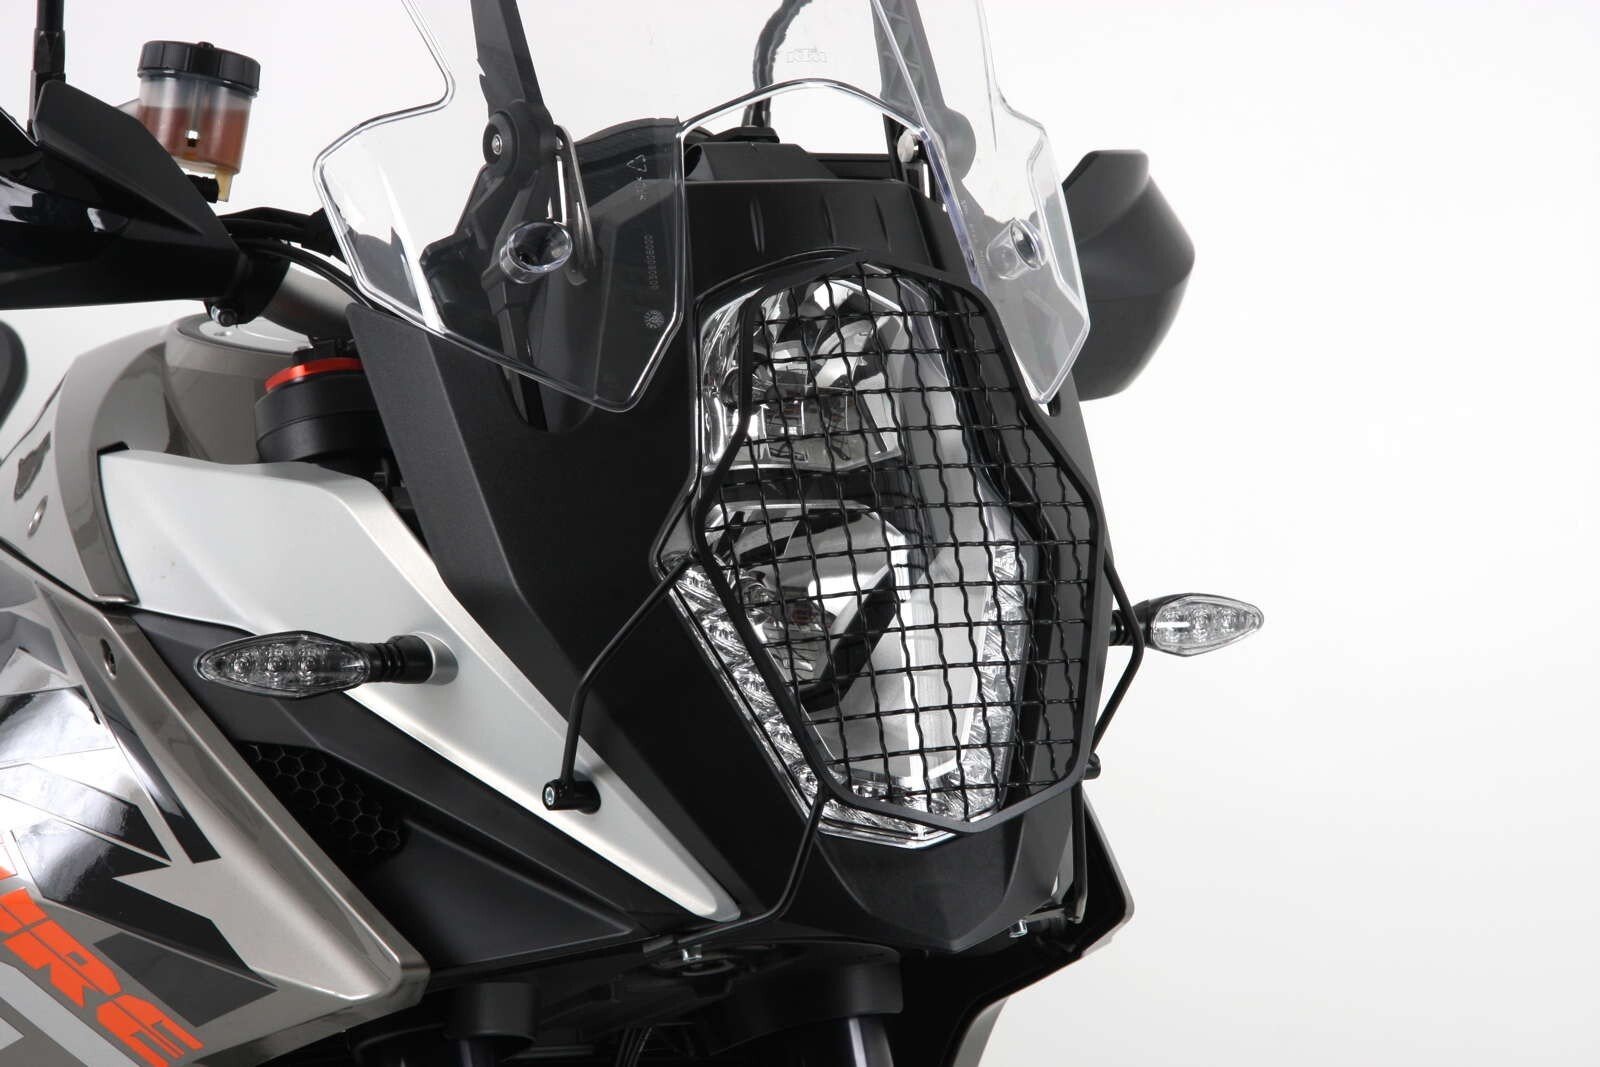 Hepco and Becker HEADLIGHT GRILL FOR KTM 1090 Adventure /R